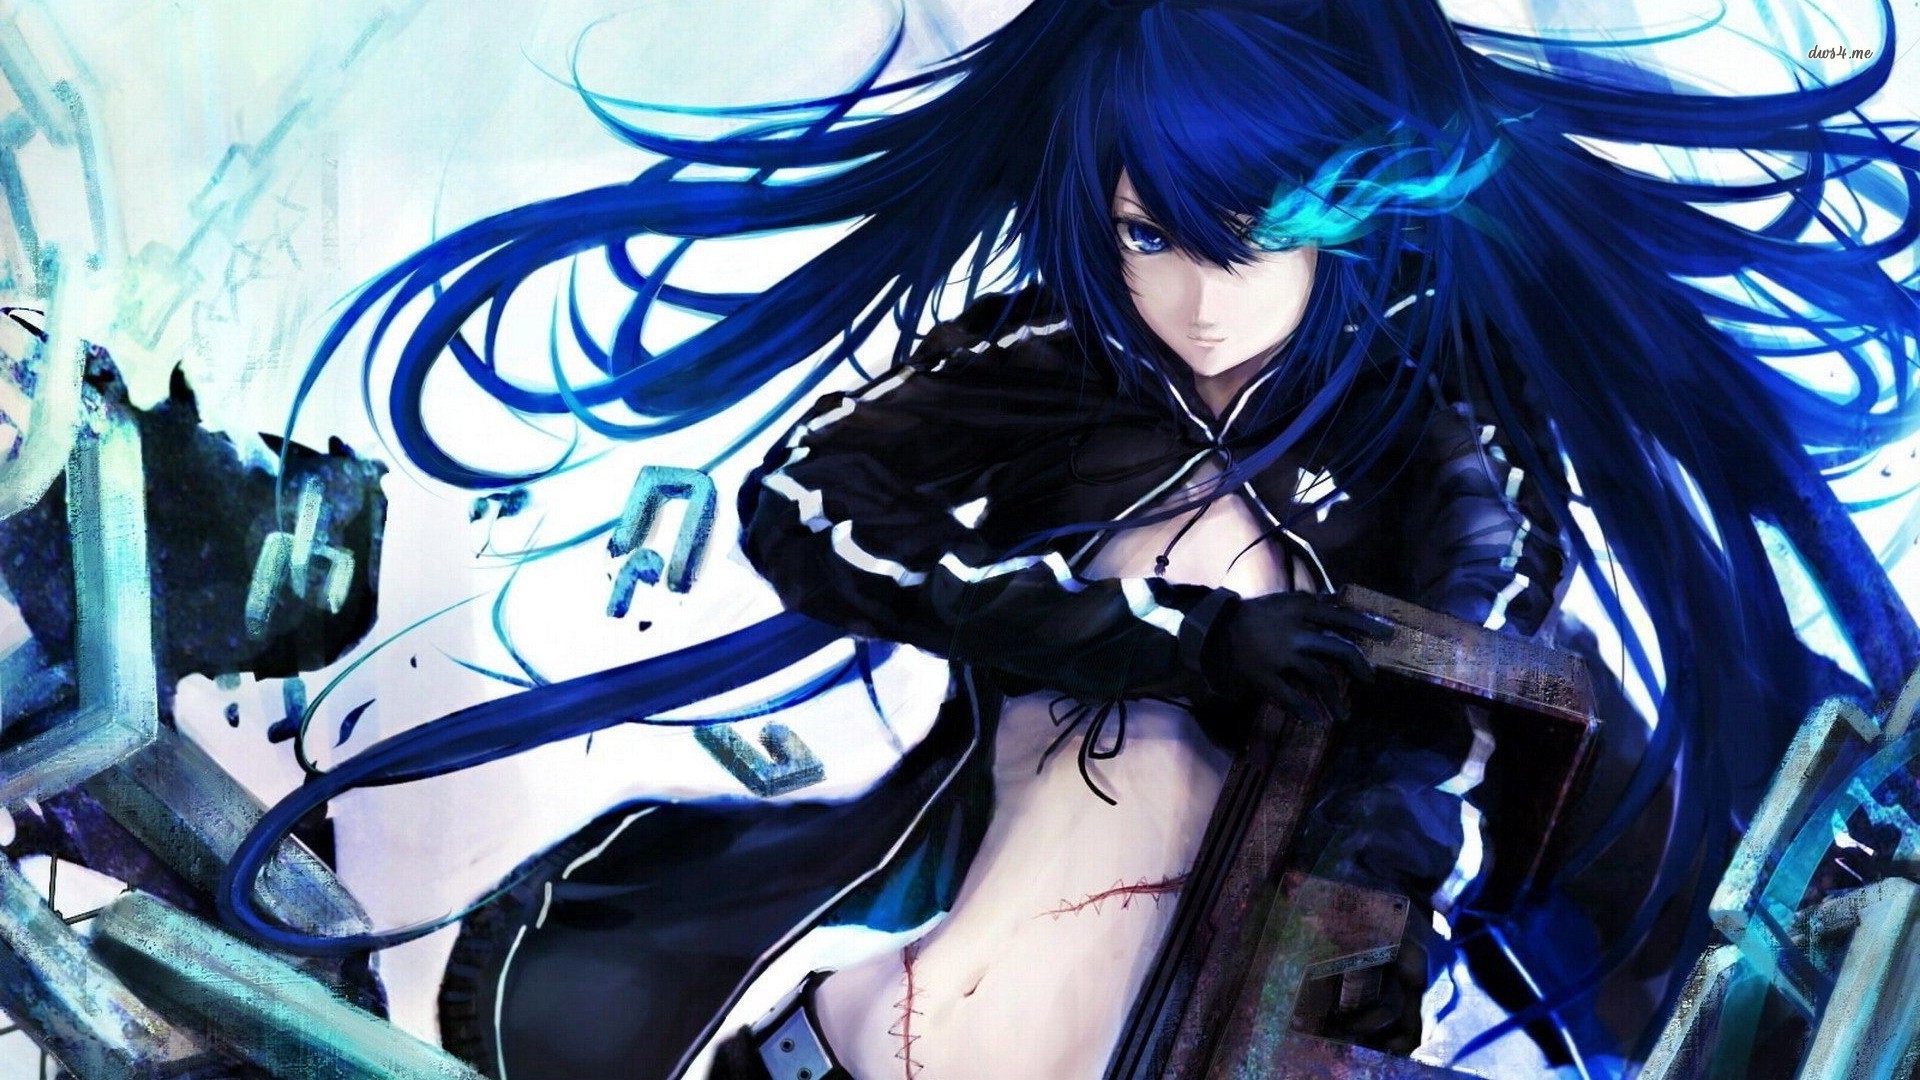 Stella from Black Rock Shooter Wallpaper | HD Wallpapers Download